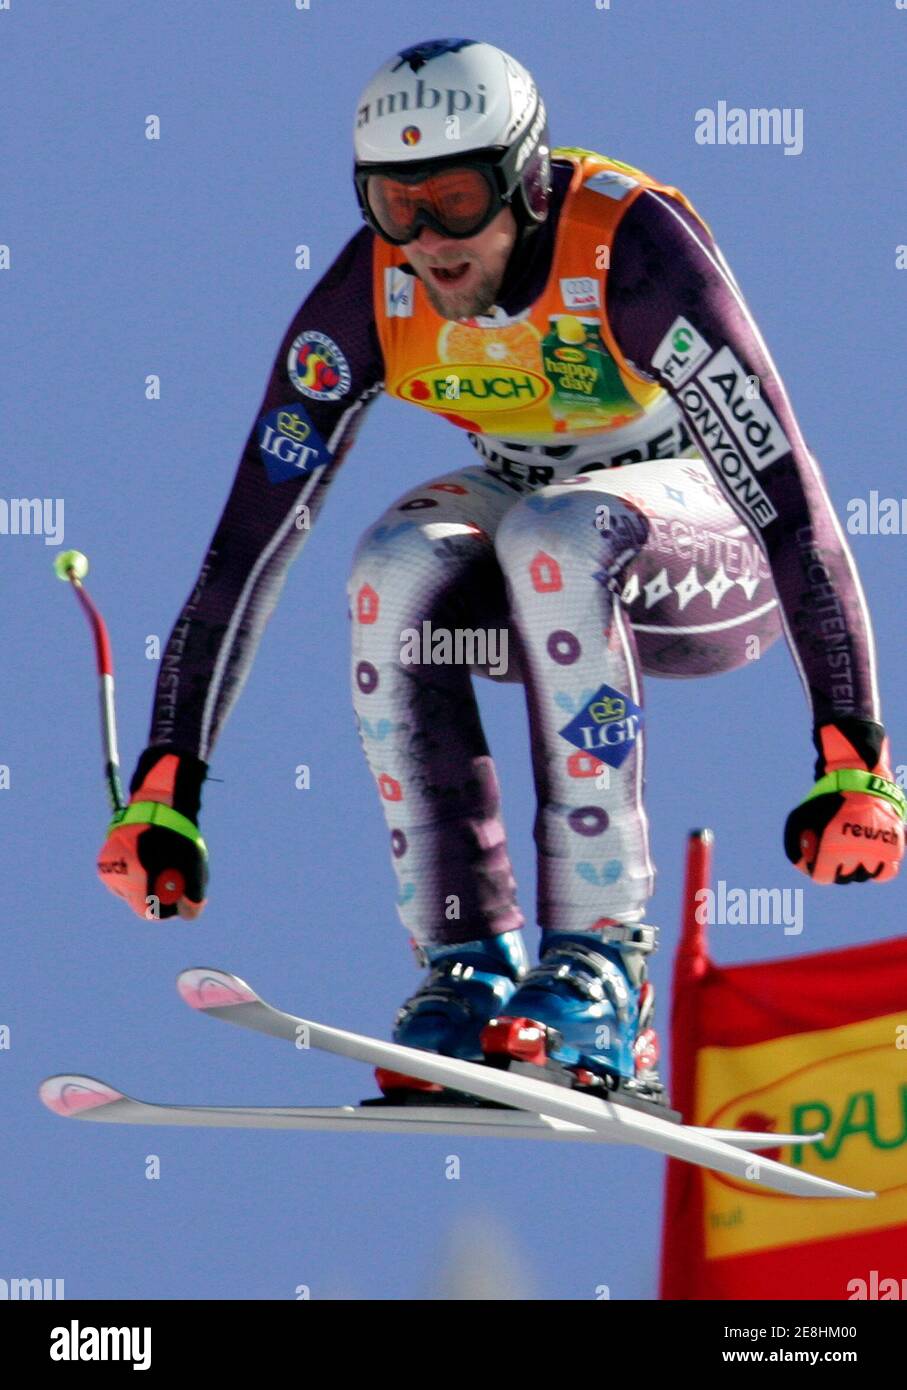 Marco Buechel of Liechtenstein skis to set the fifth best time in the downhill portion of the men's combined World Cup race in Beaver Creek, Colorado, November 30, 2006.  REUTERS/Rick Wilking (UNITED STATES) Stock Photo